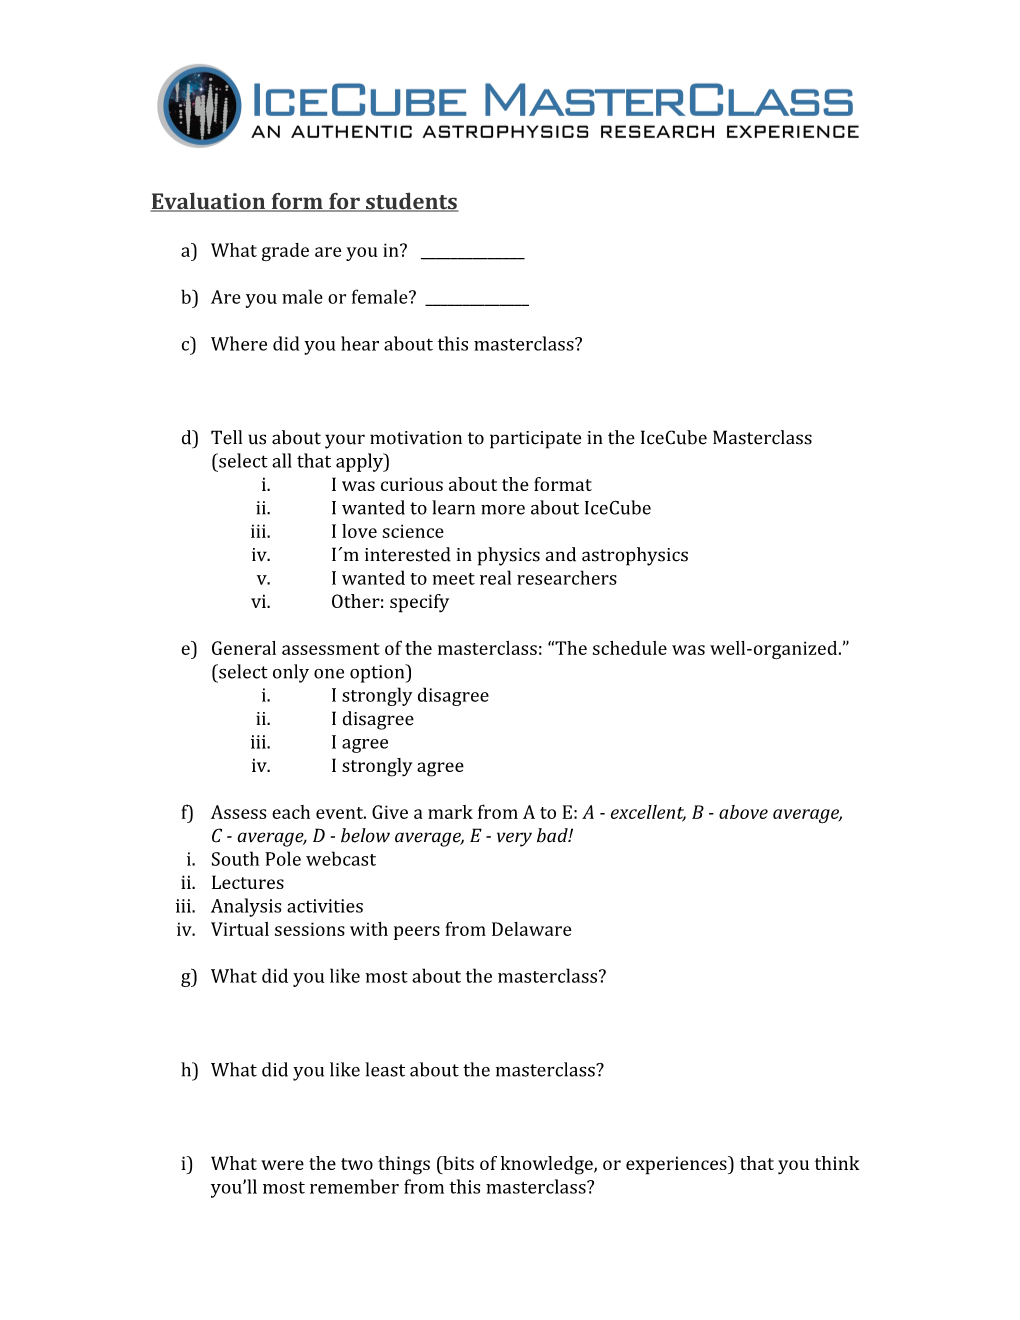 Evaluation Form for Students